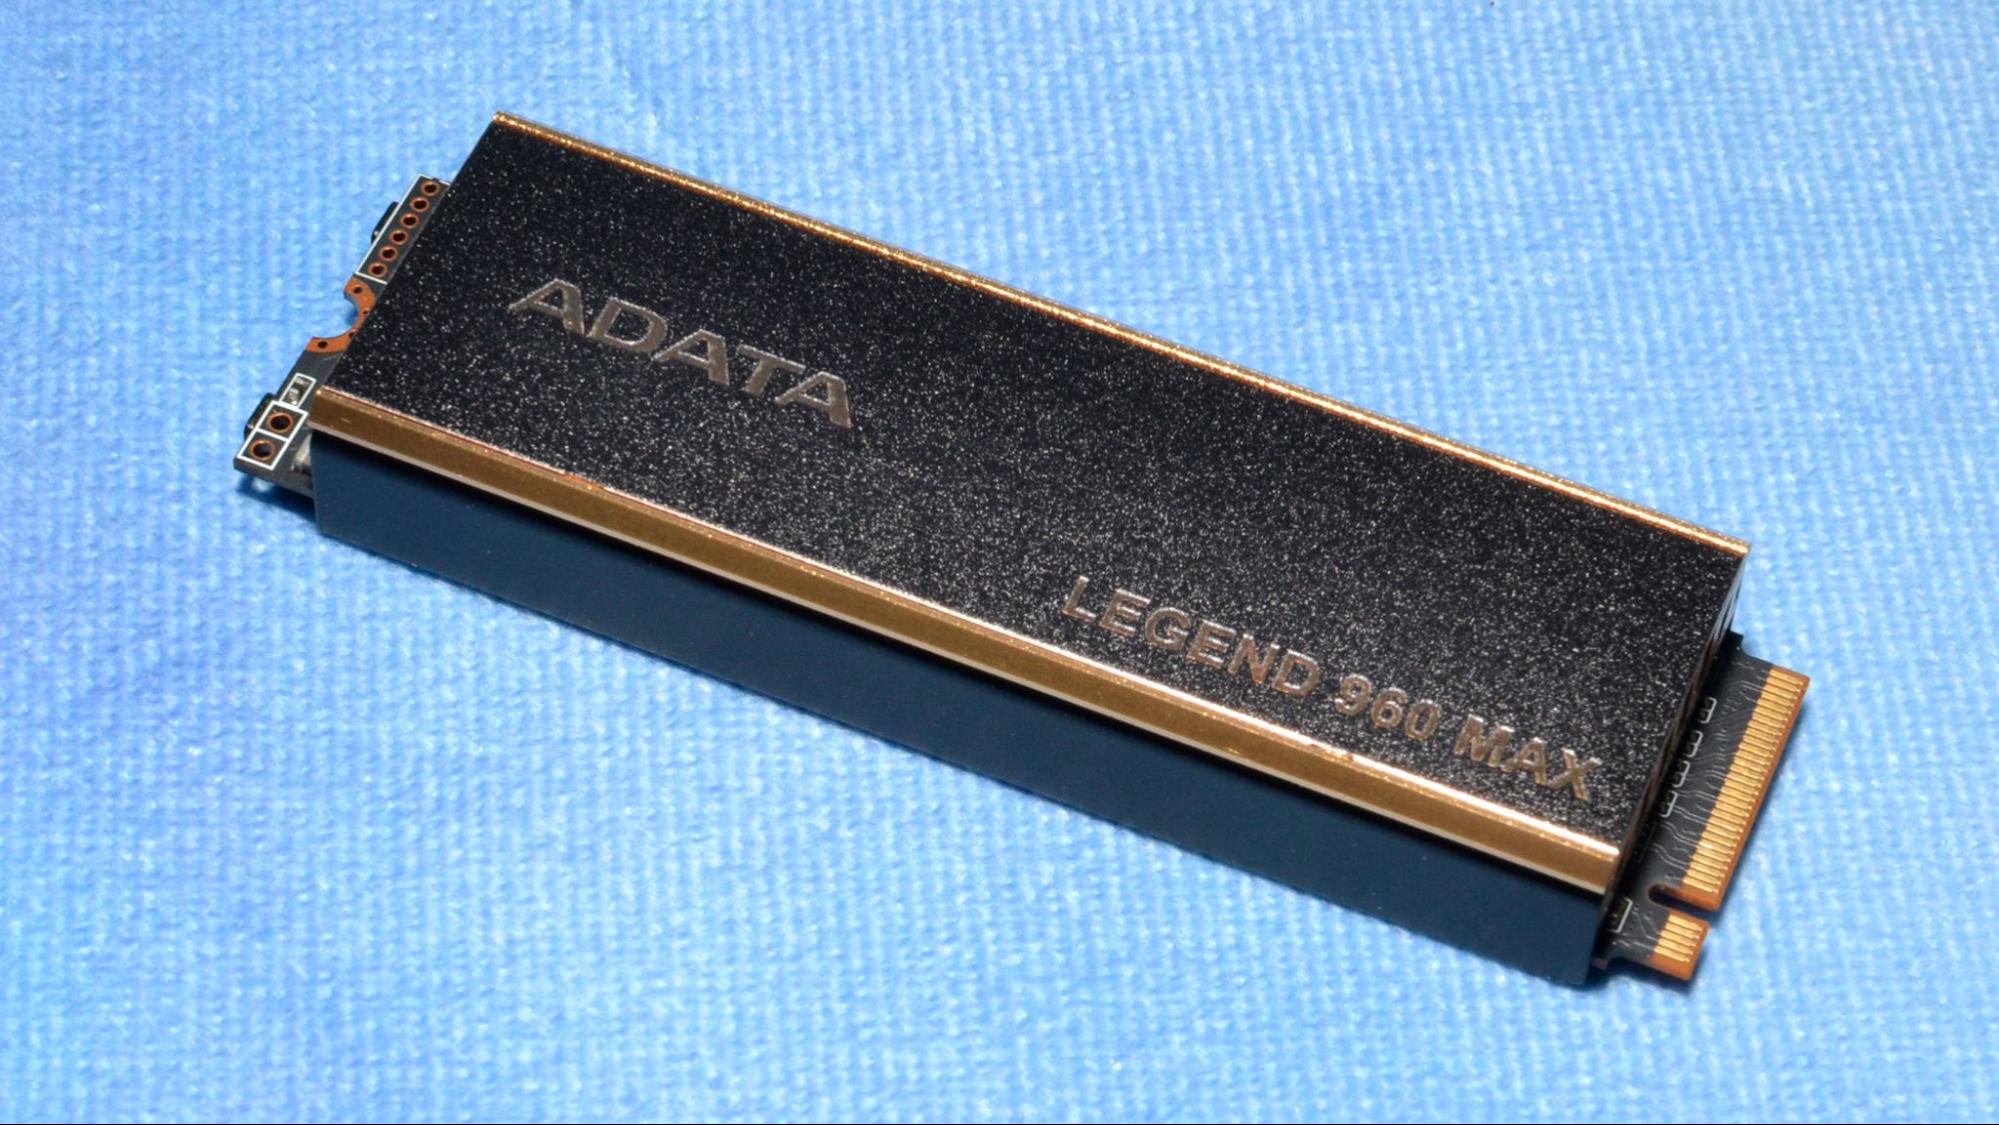 Adata Legend 960 Max SSD Review: Now With Extra Toppings | Tom's